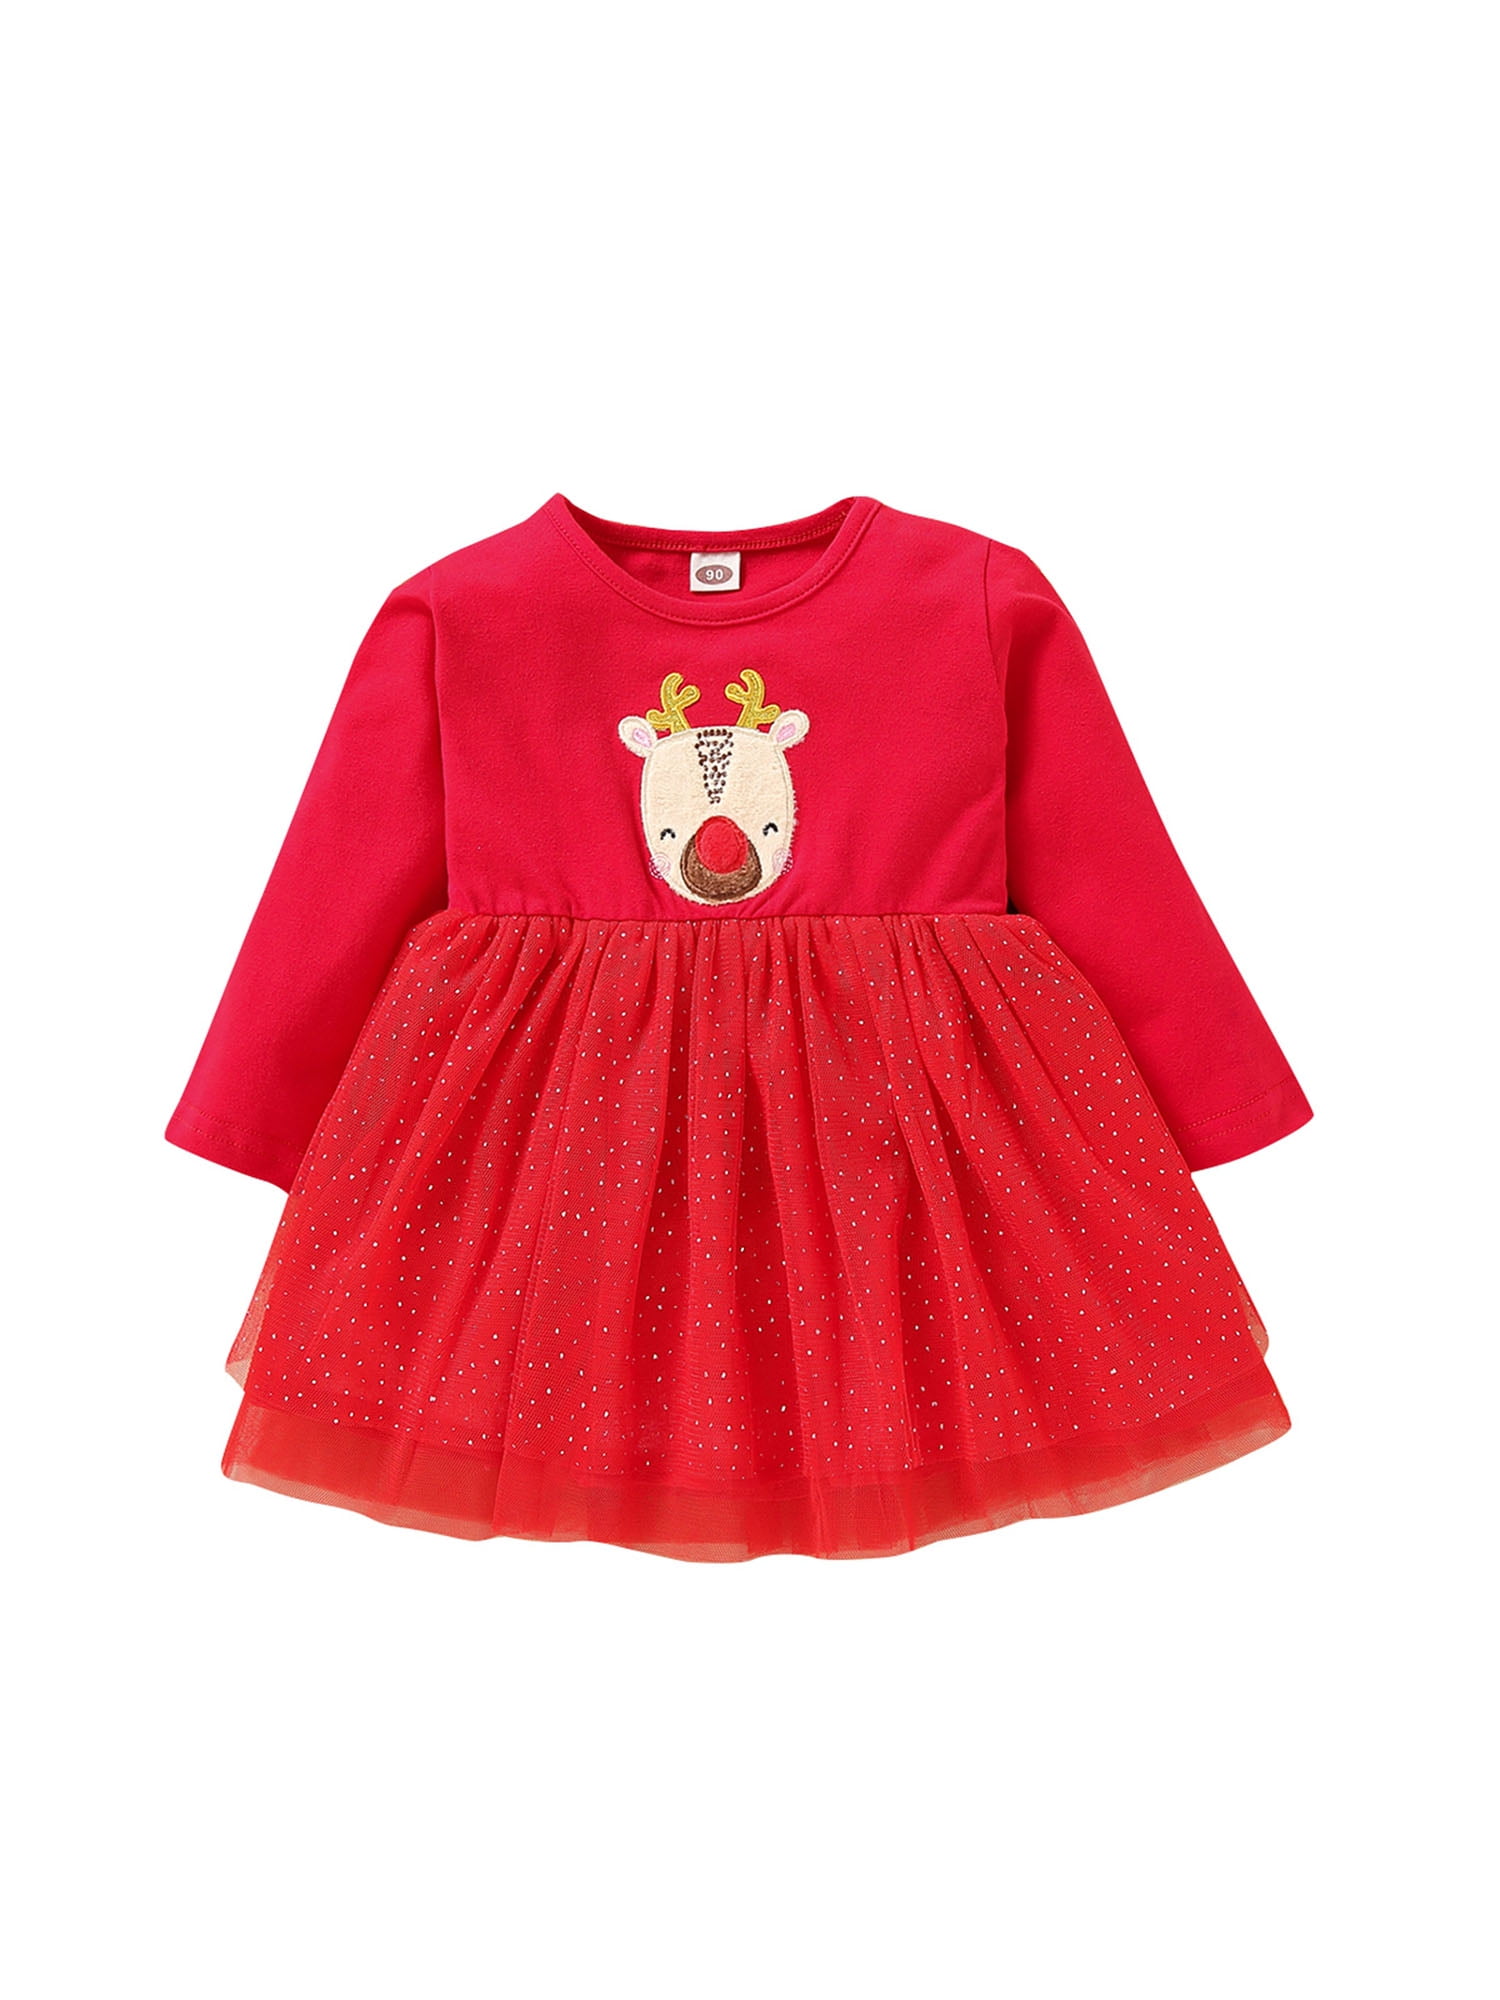 Xmas Infant Baby Kids Girl Clothes Long Sleeve Christmas Party Princess Dress